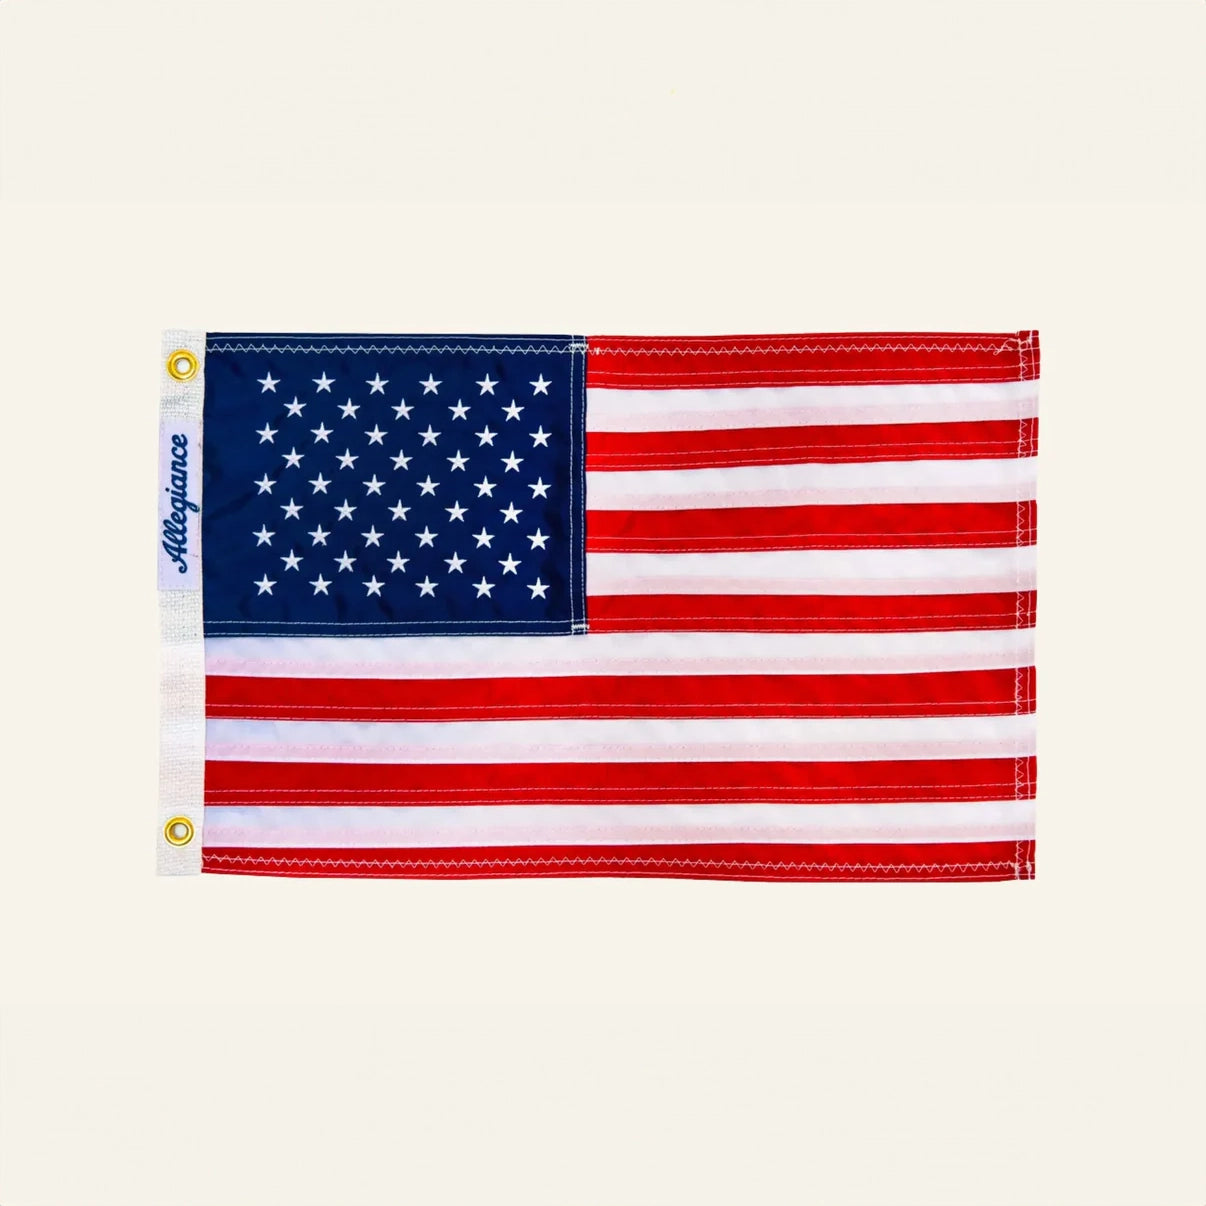 American flag for boat